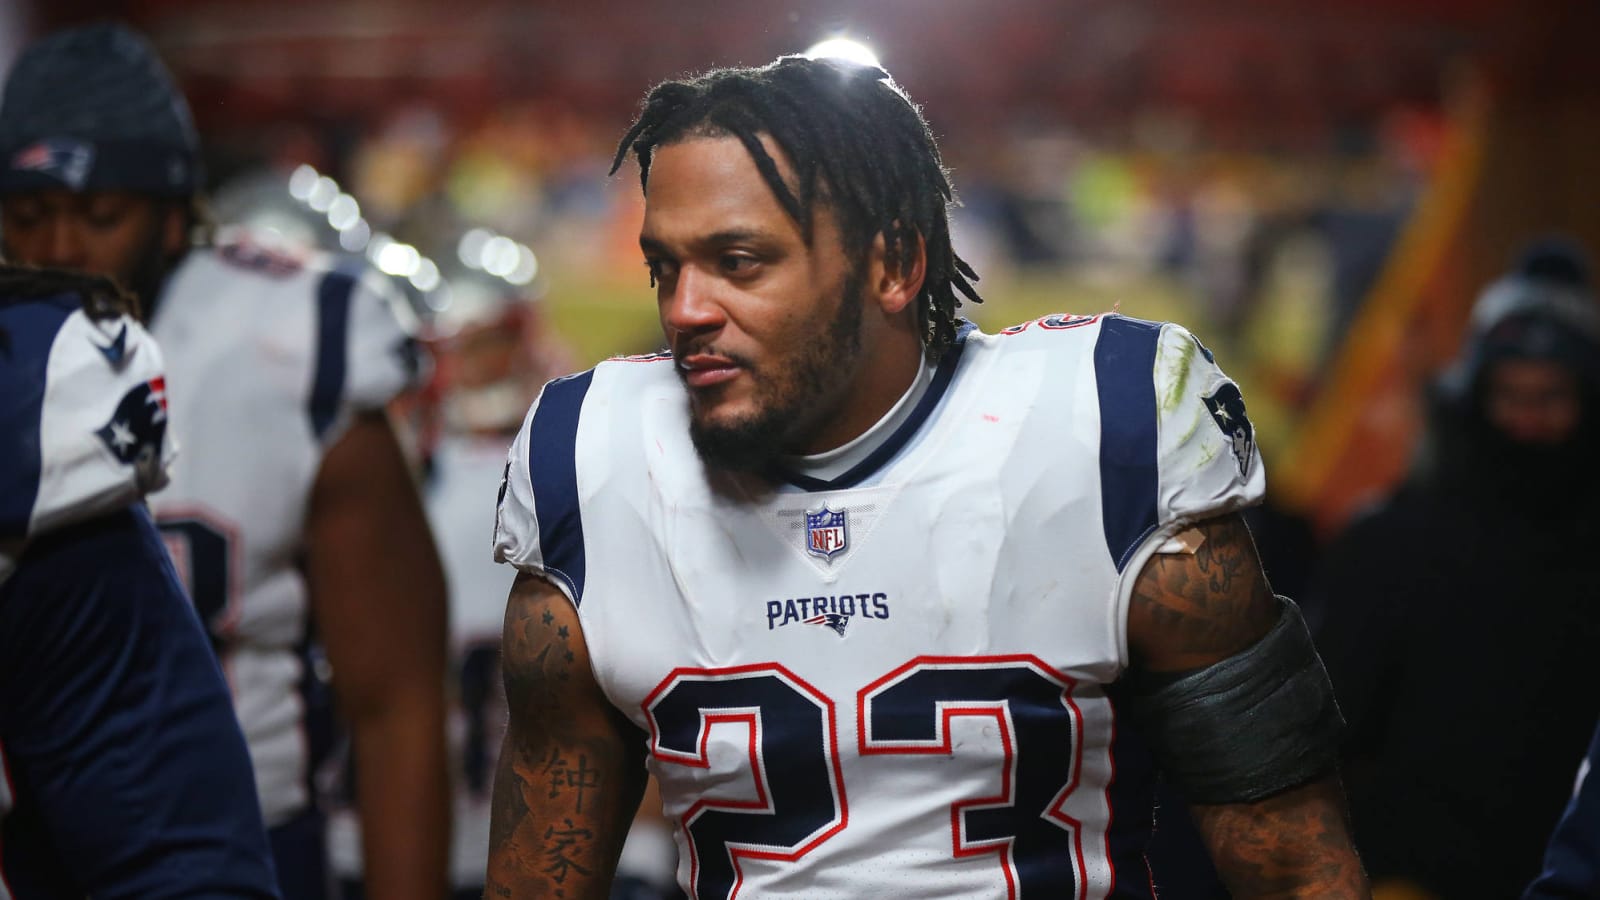 Patrick Chung arrested, charged with assault and battery